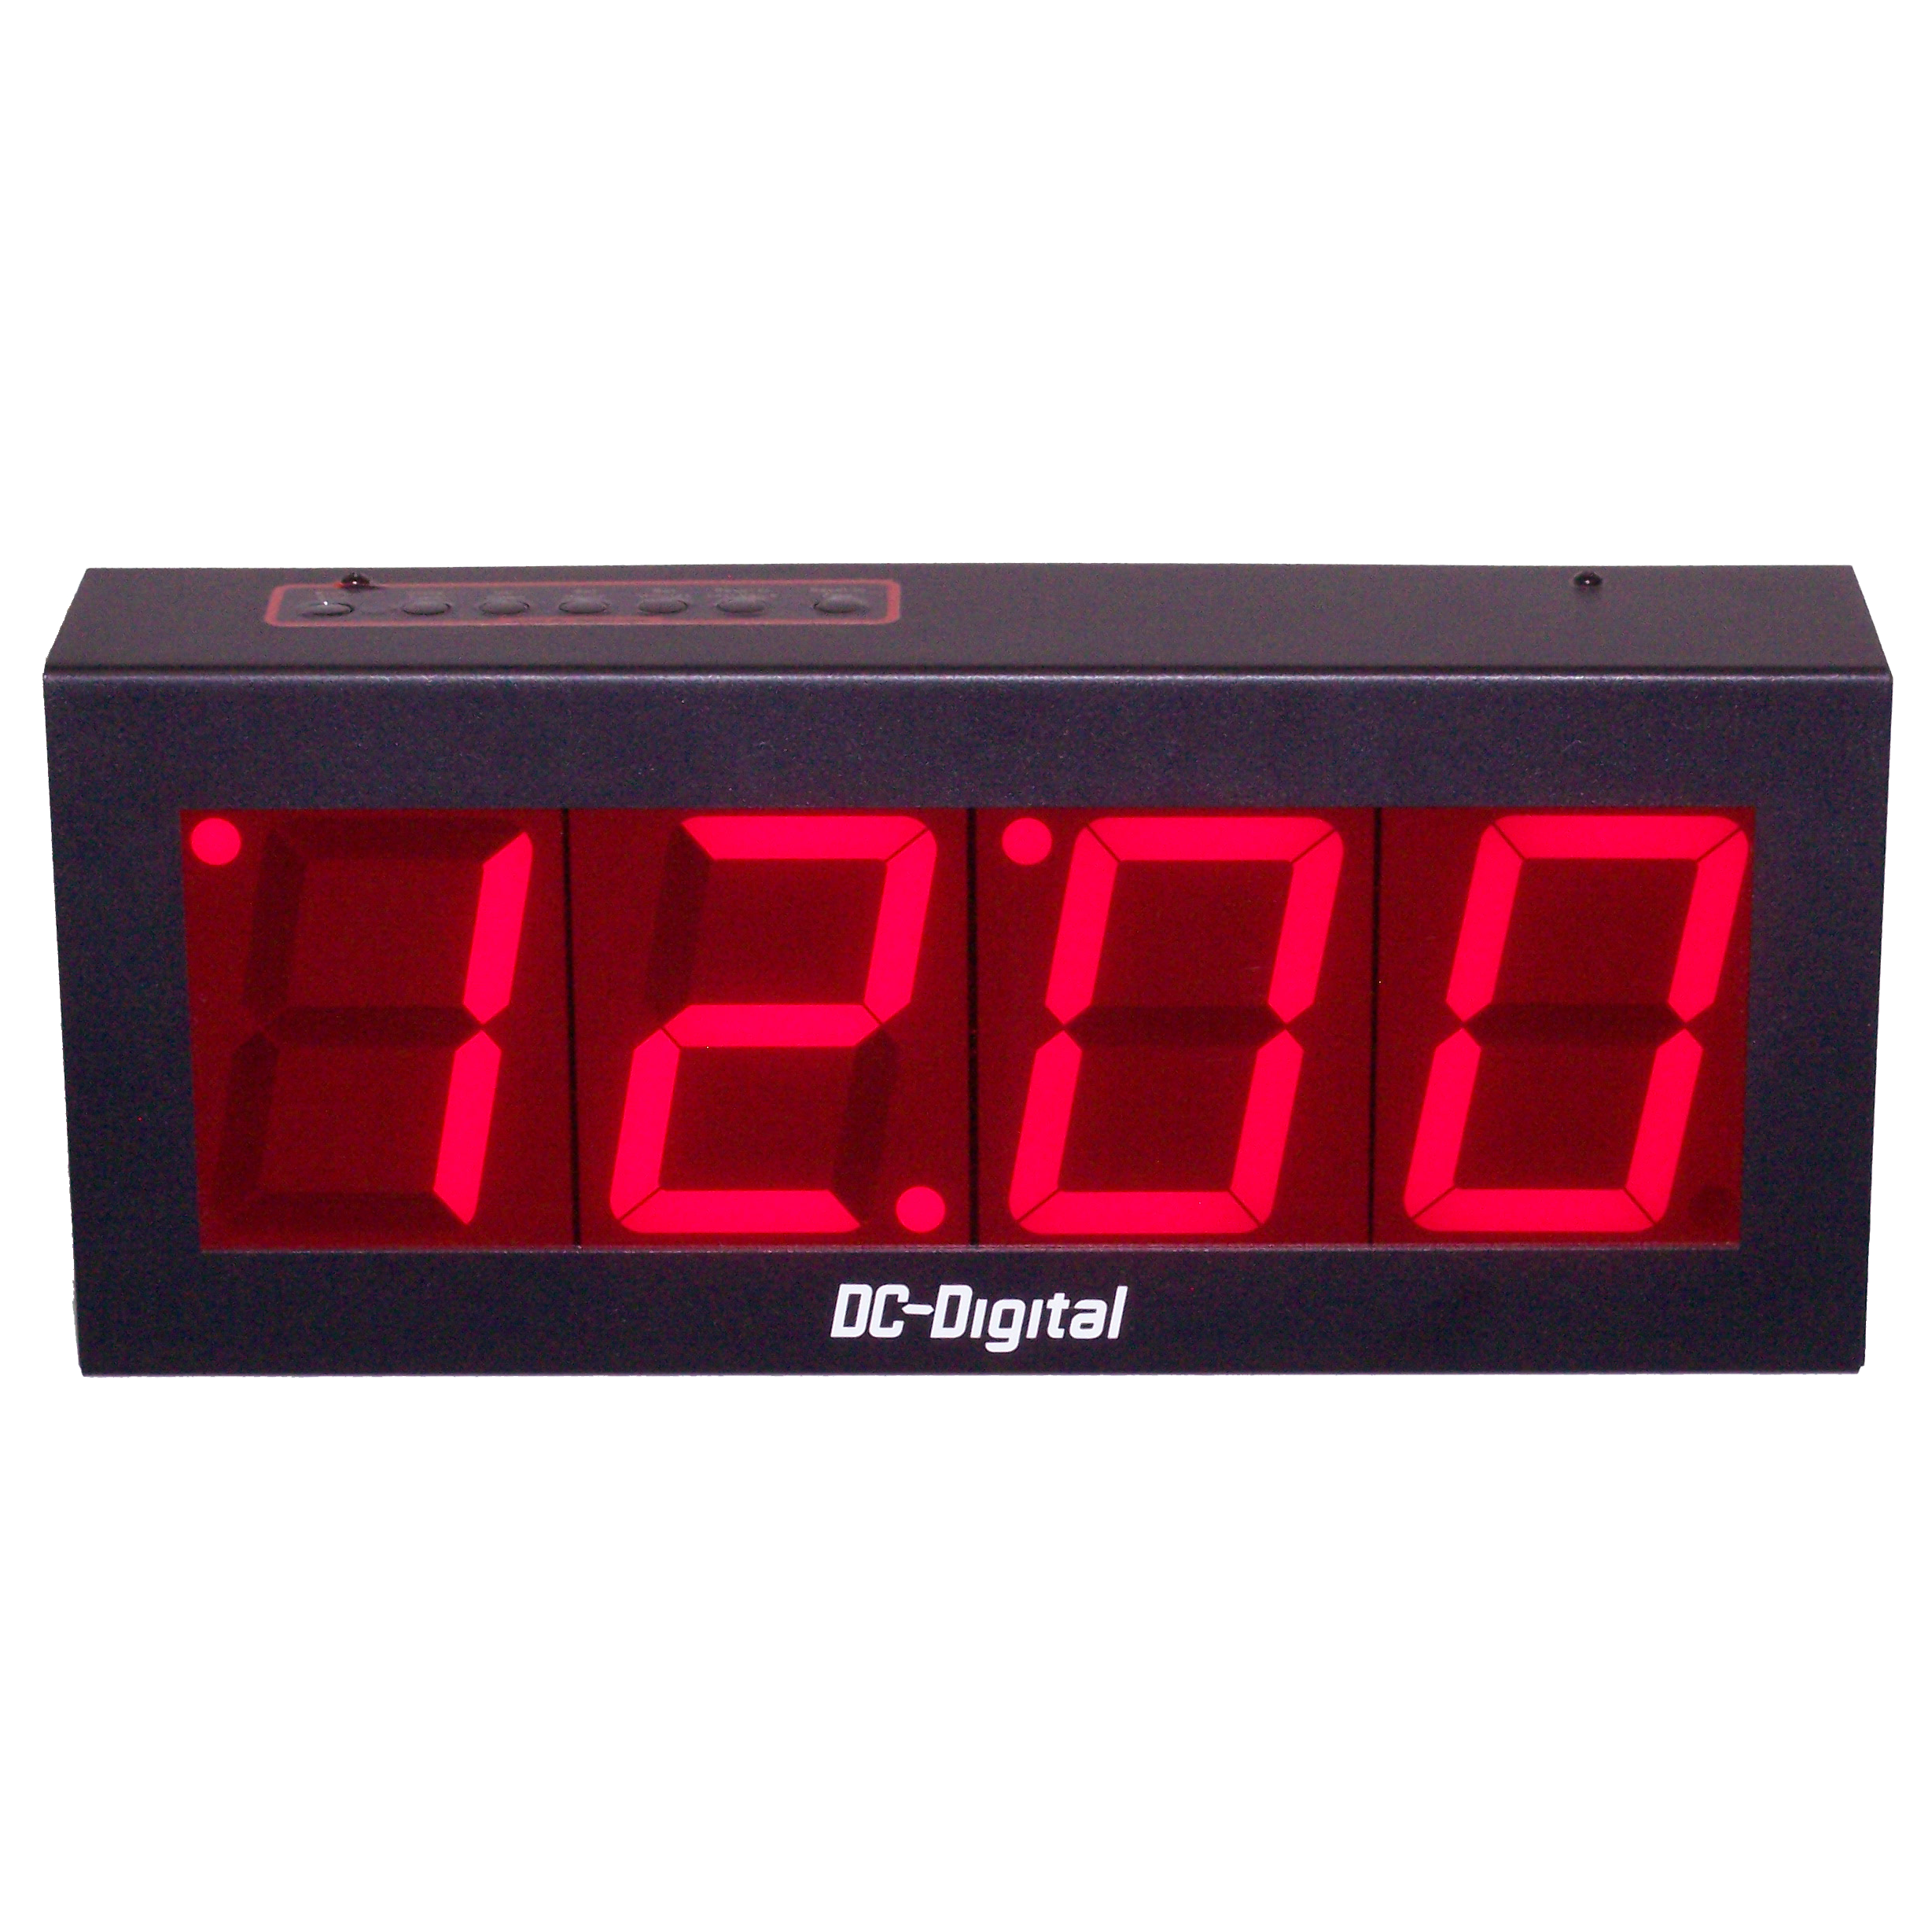 (DC-40UT) 4.0 Inch LED Digital, Top Mounted Push-Button Controlled, Count Up timer, Countdown Timer, Time of Day Clock